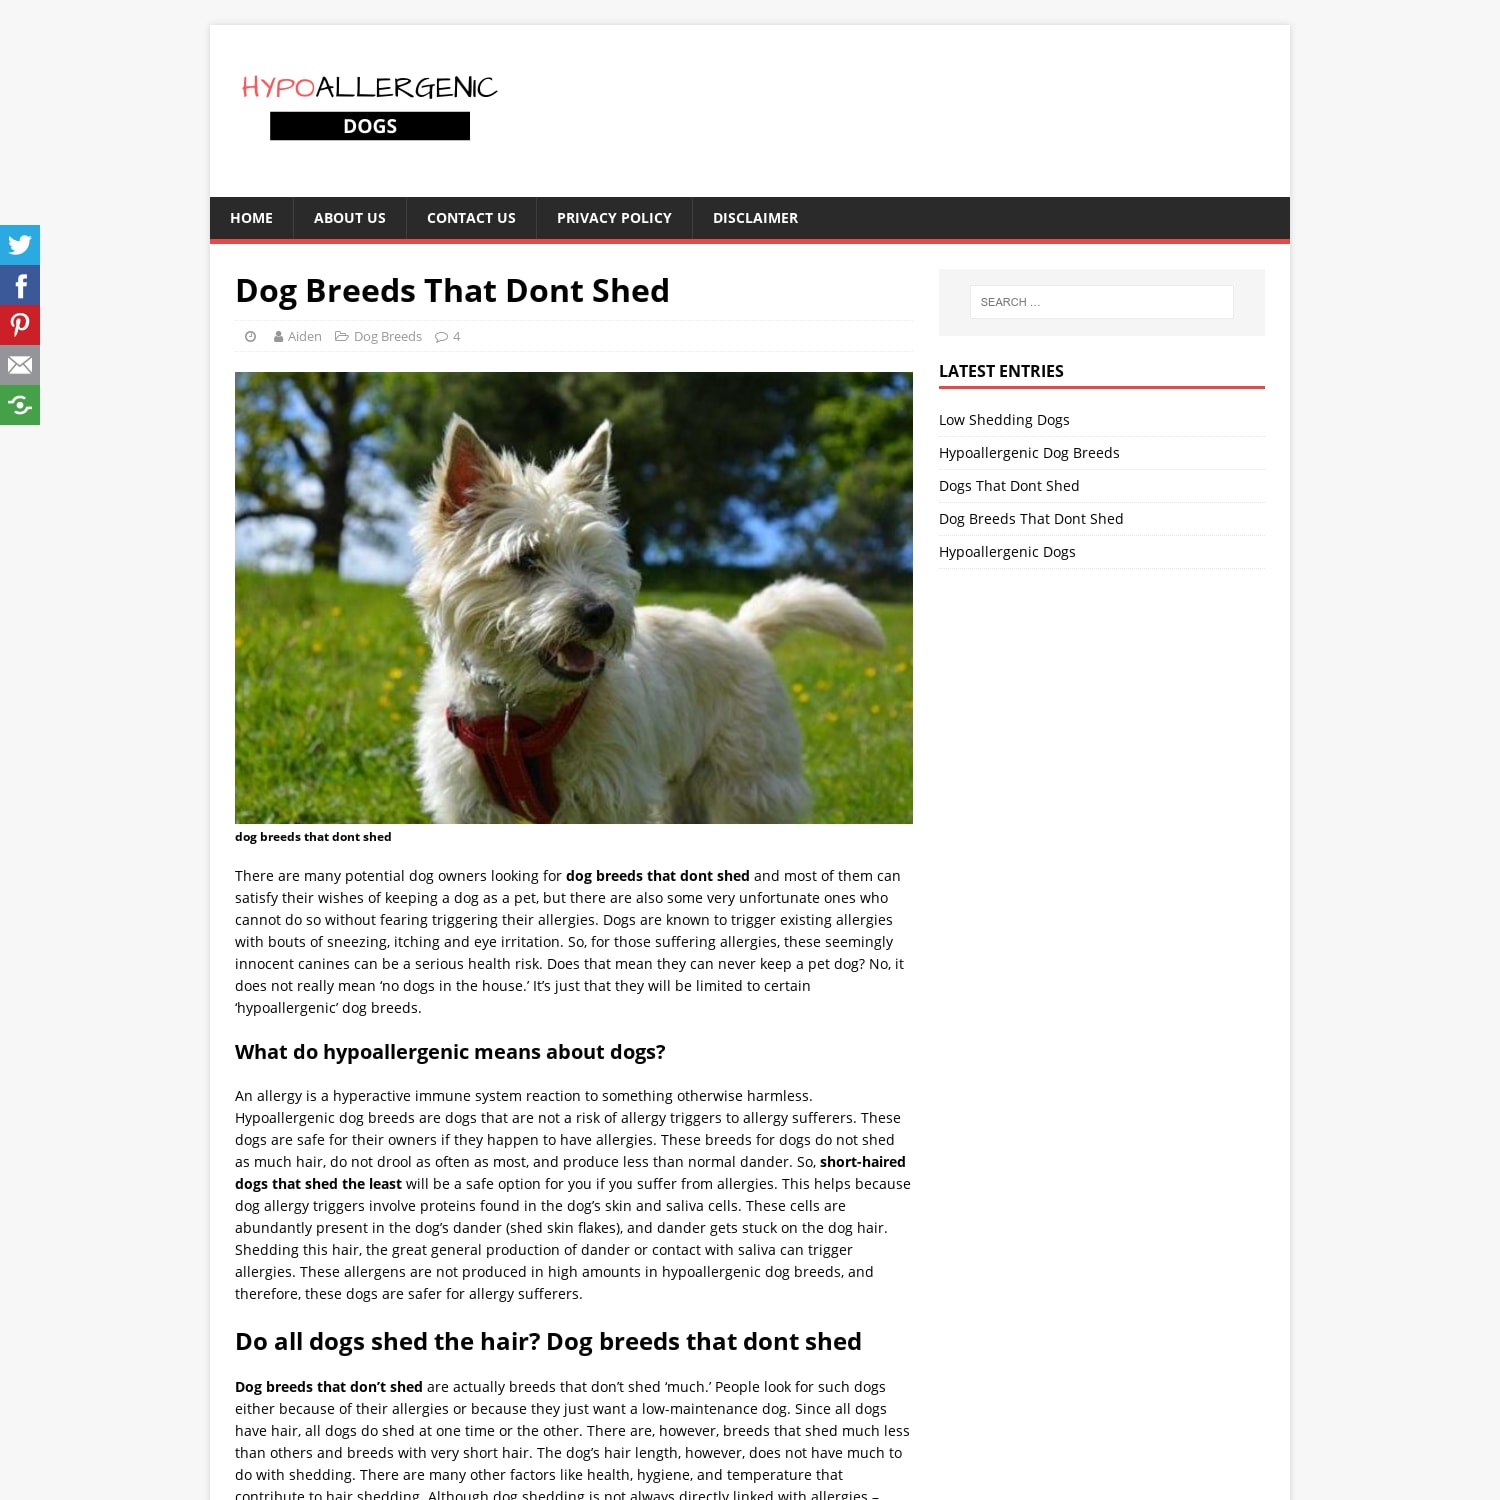 Dog Breeds that Dont Shed: A guide on Hypoallergenic Dogs